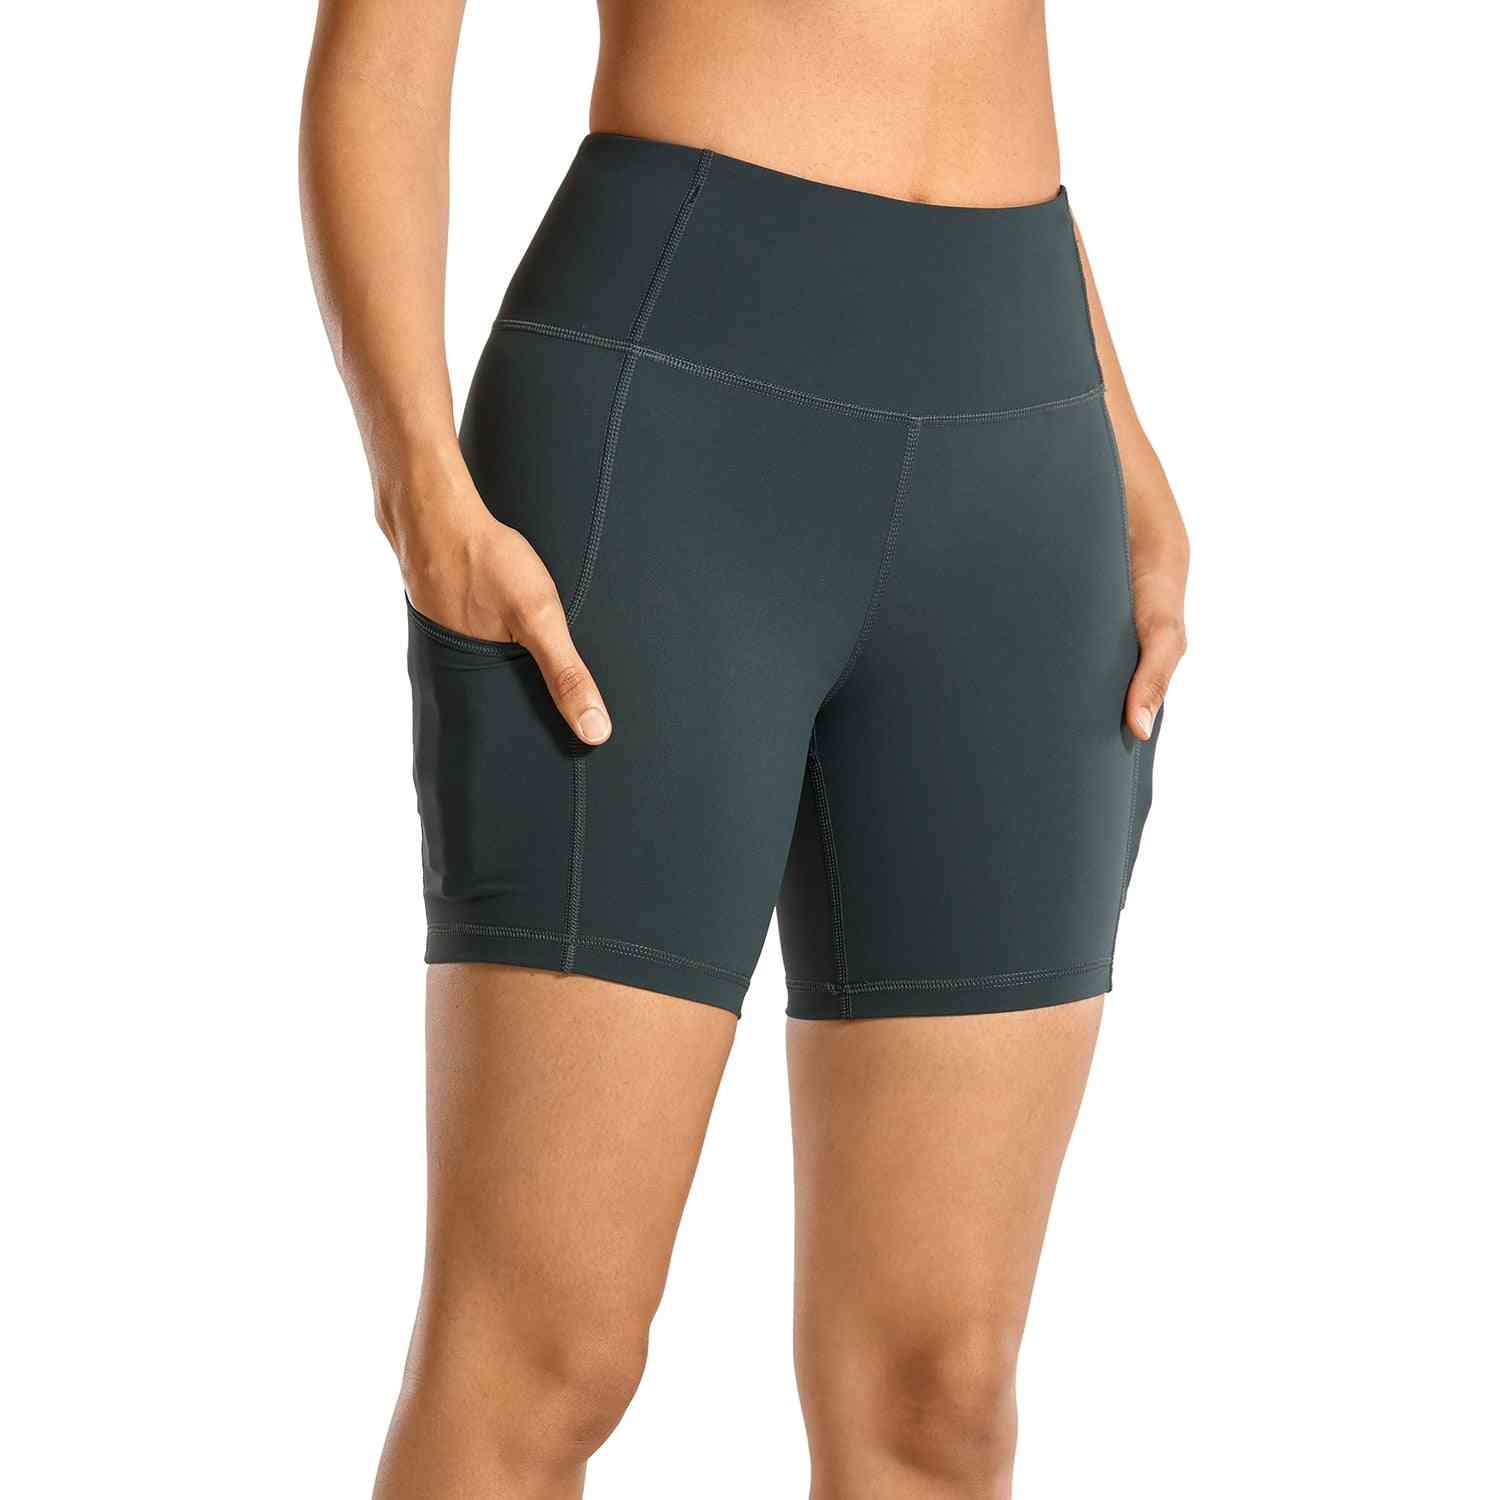 Women's Breathable, Sport Shorts With Side Pockets